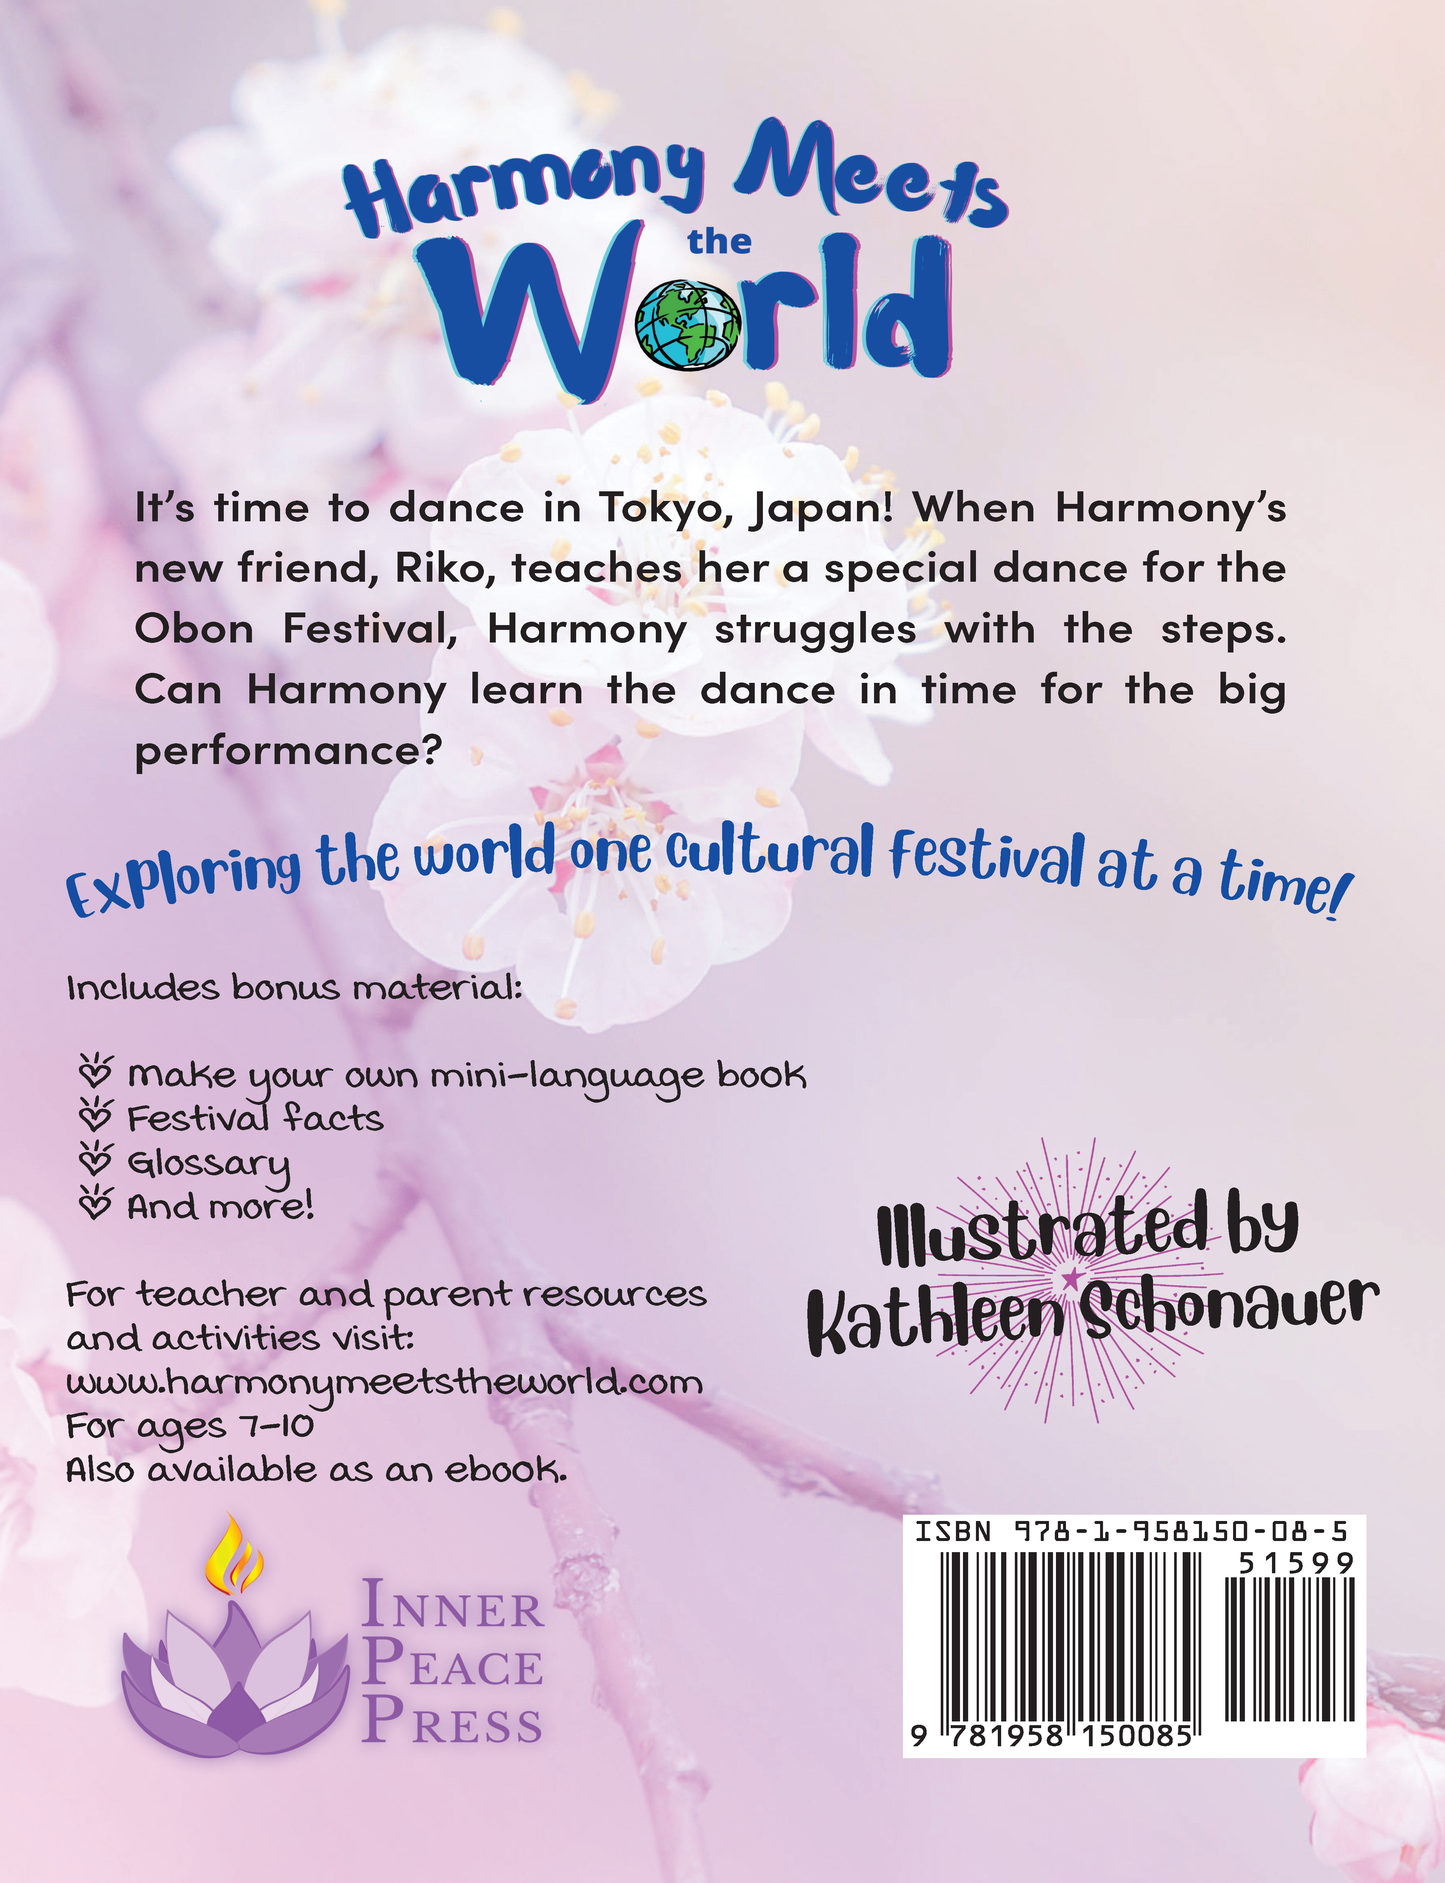 Harmony Meets the World: Let's Dance It's Obon